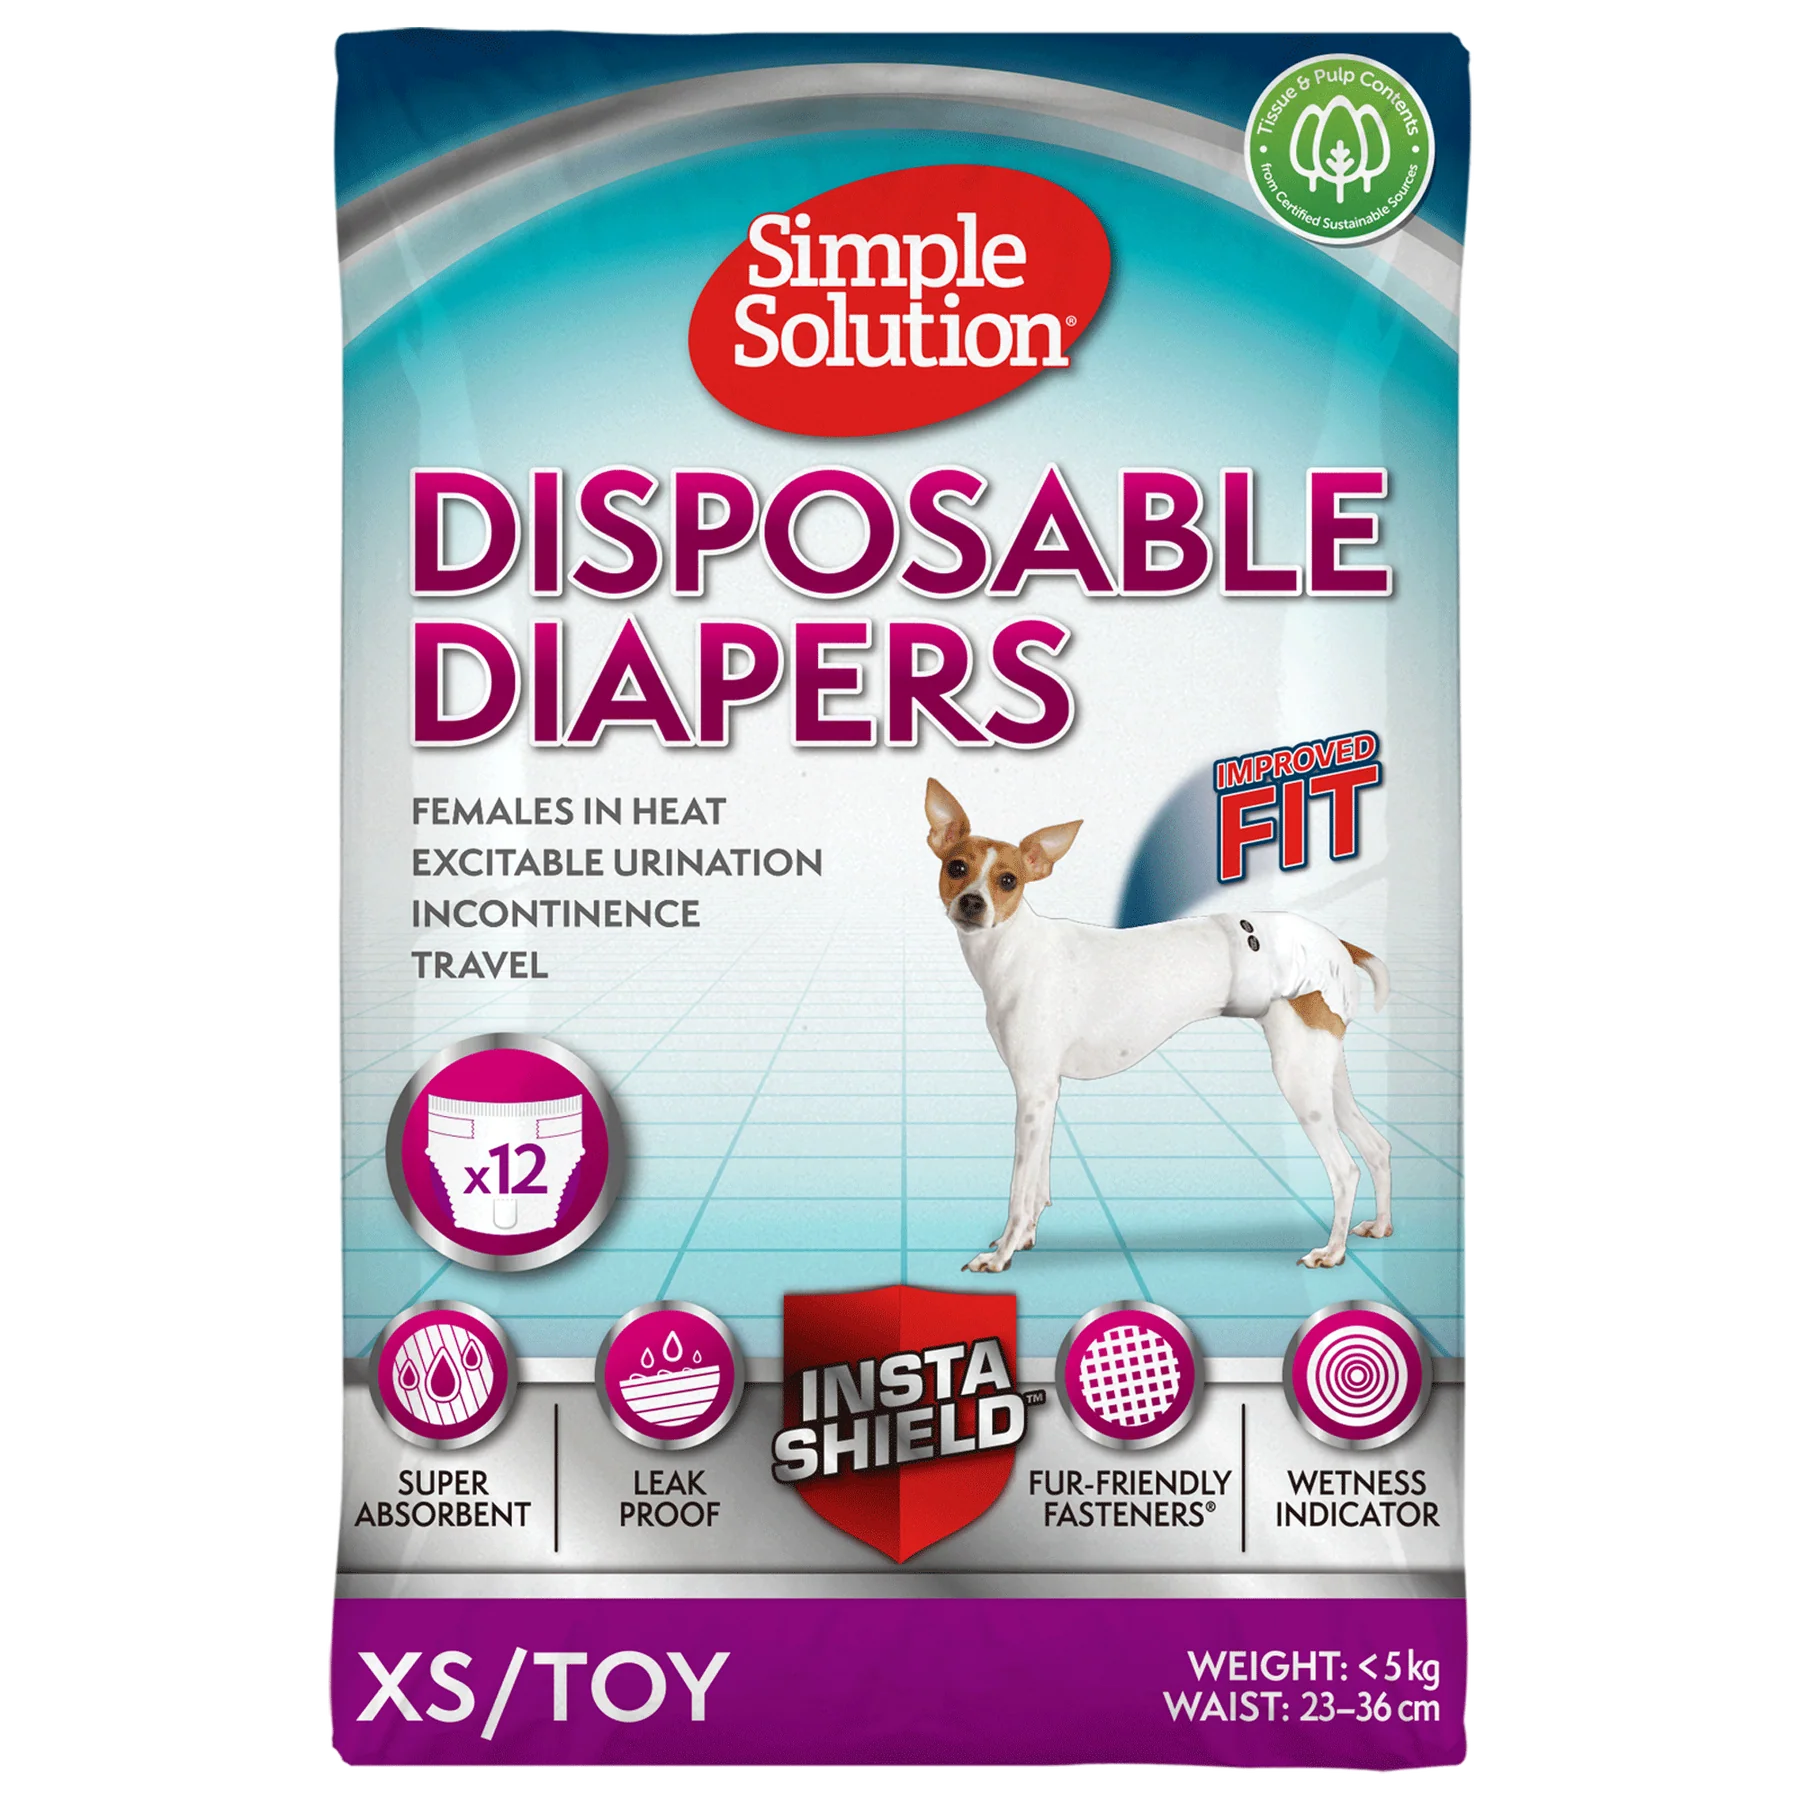 Simple Solution Disposable Diapers, Pack Of 12 Pcs.